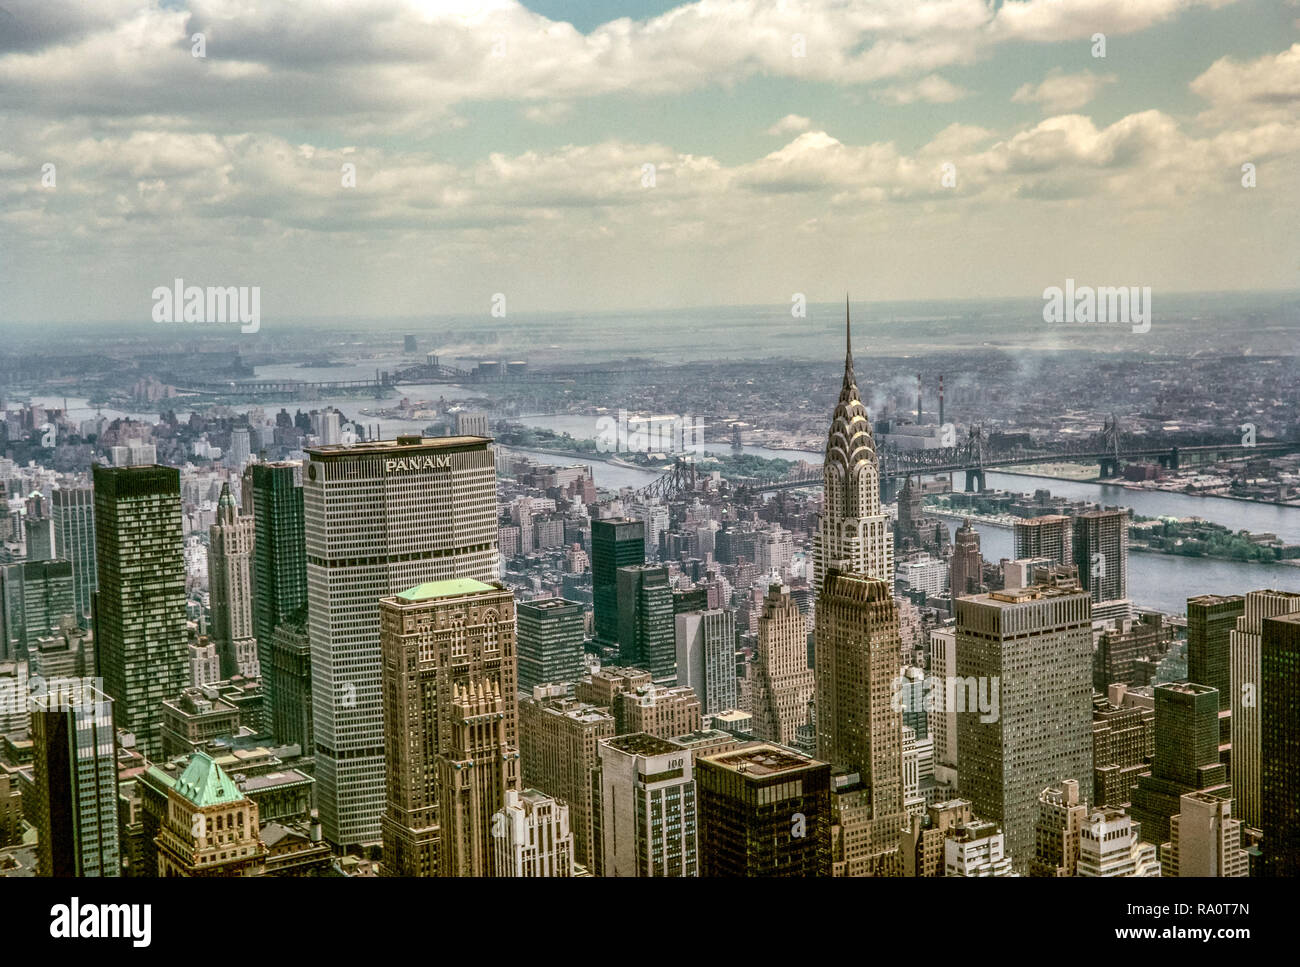 June 1964. View from the top of the Empire State Building in New York, looking across the Pan Am Building and the Chrysler Building. Stock Photo